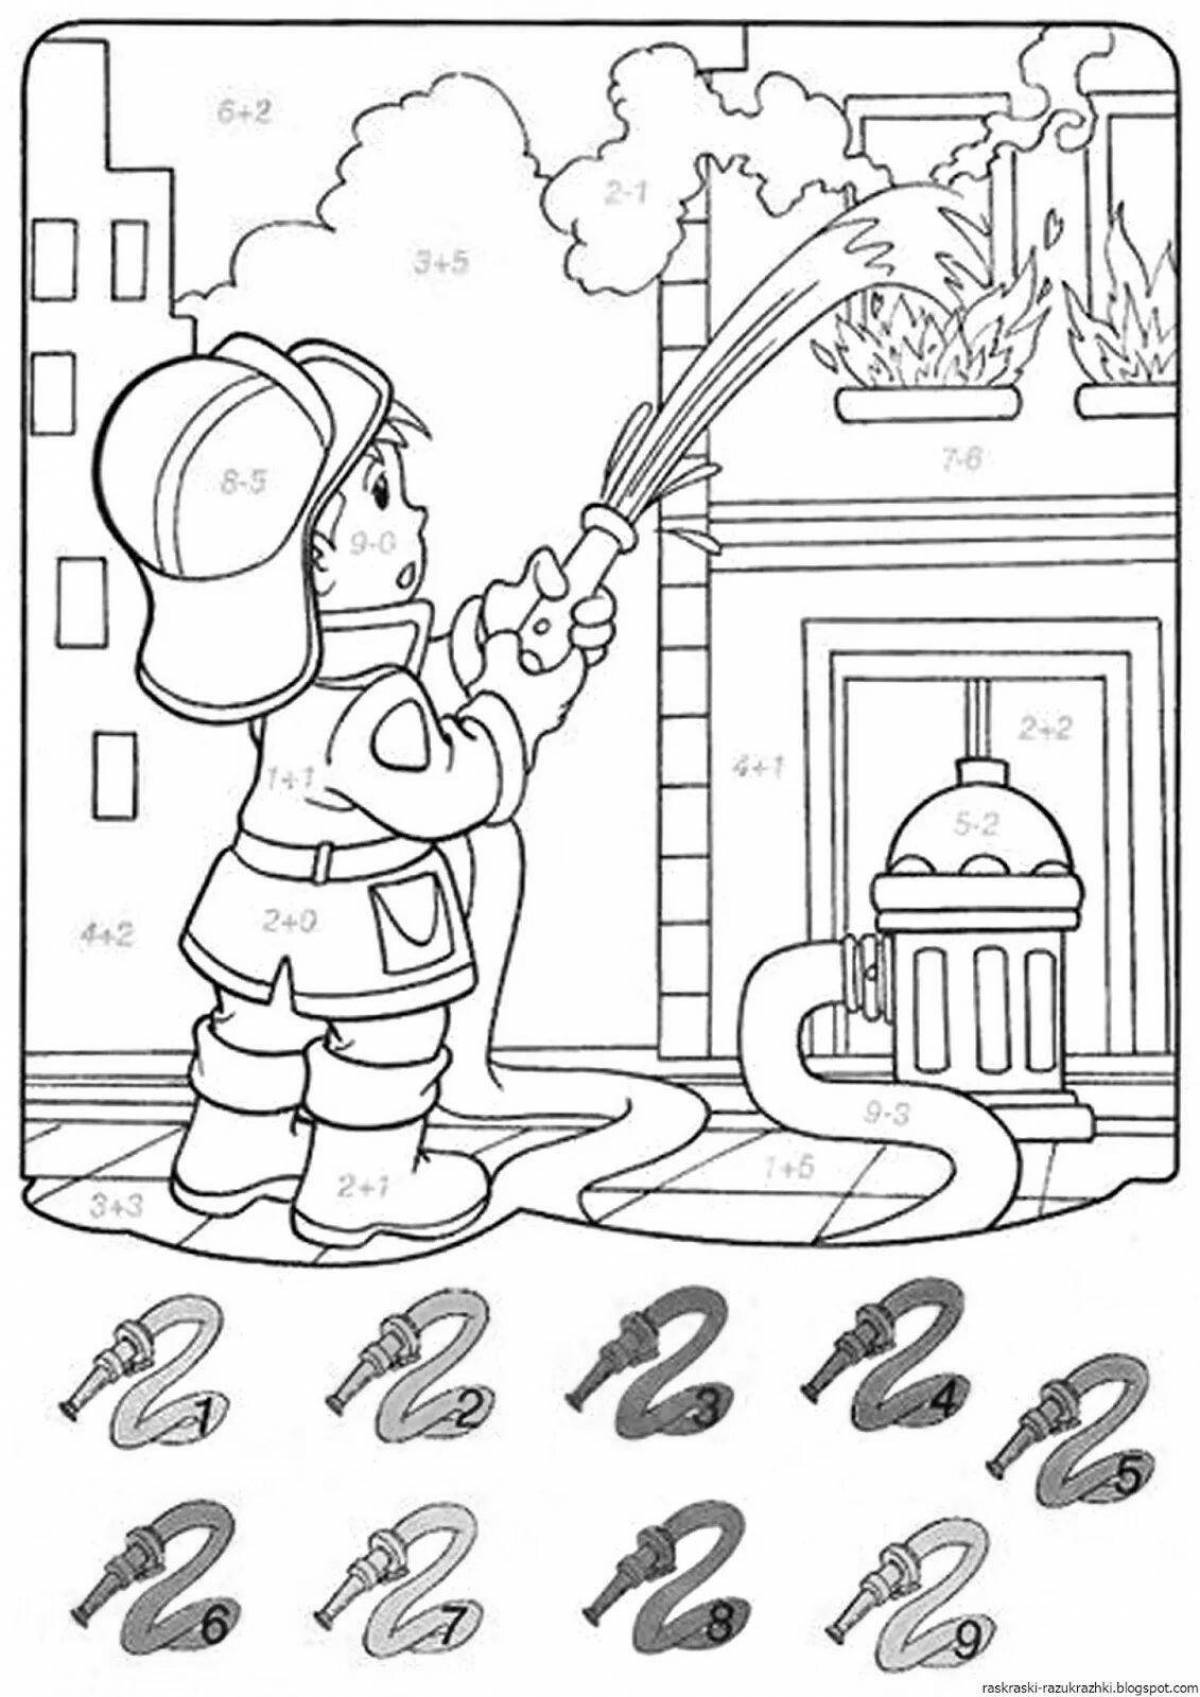 Fire safety coloring book for kindergarten